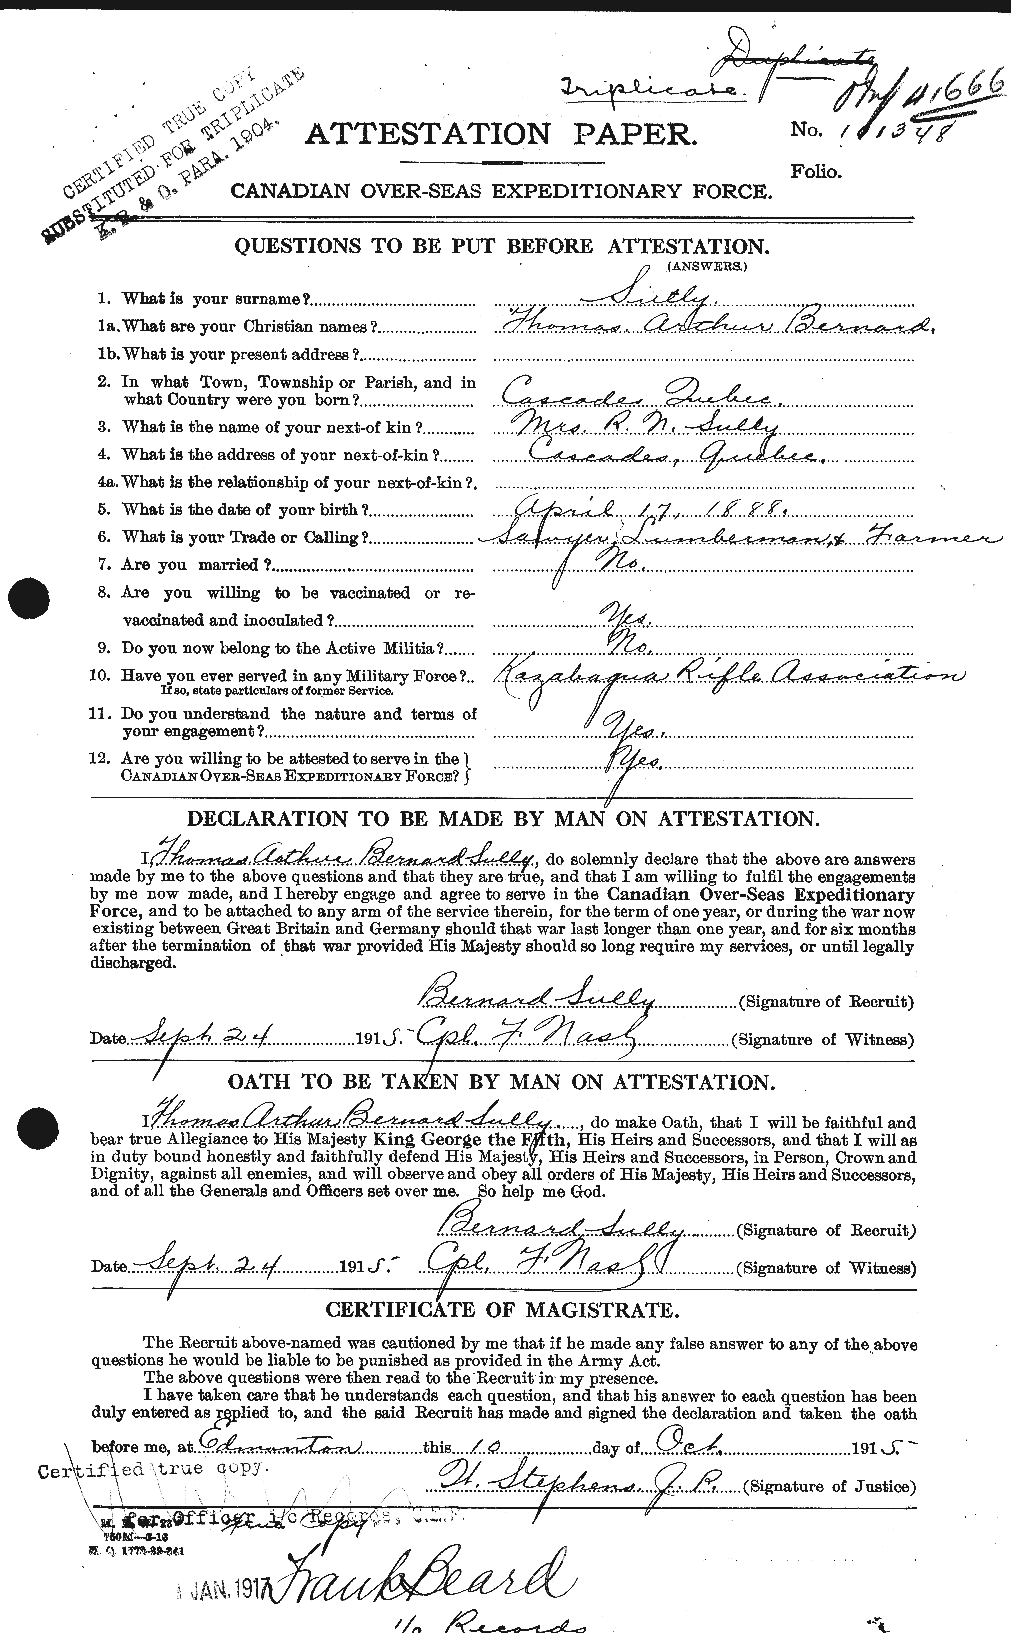 Personnel Records of the First World War - CEF 124087a